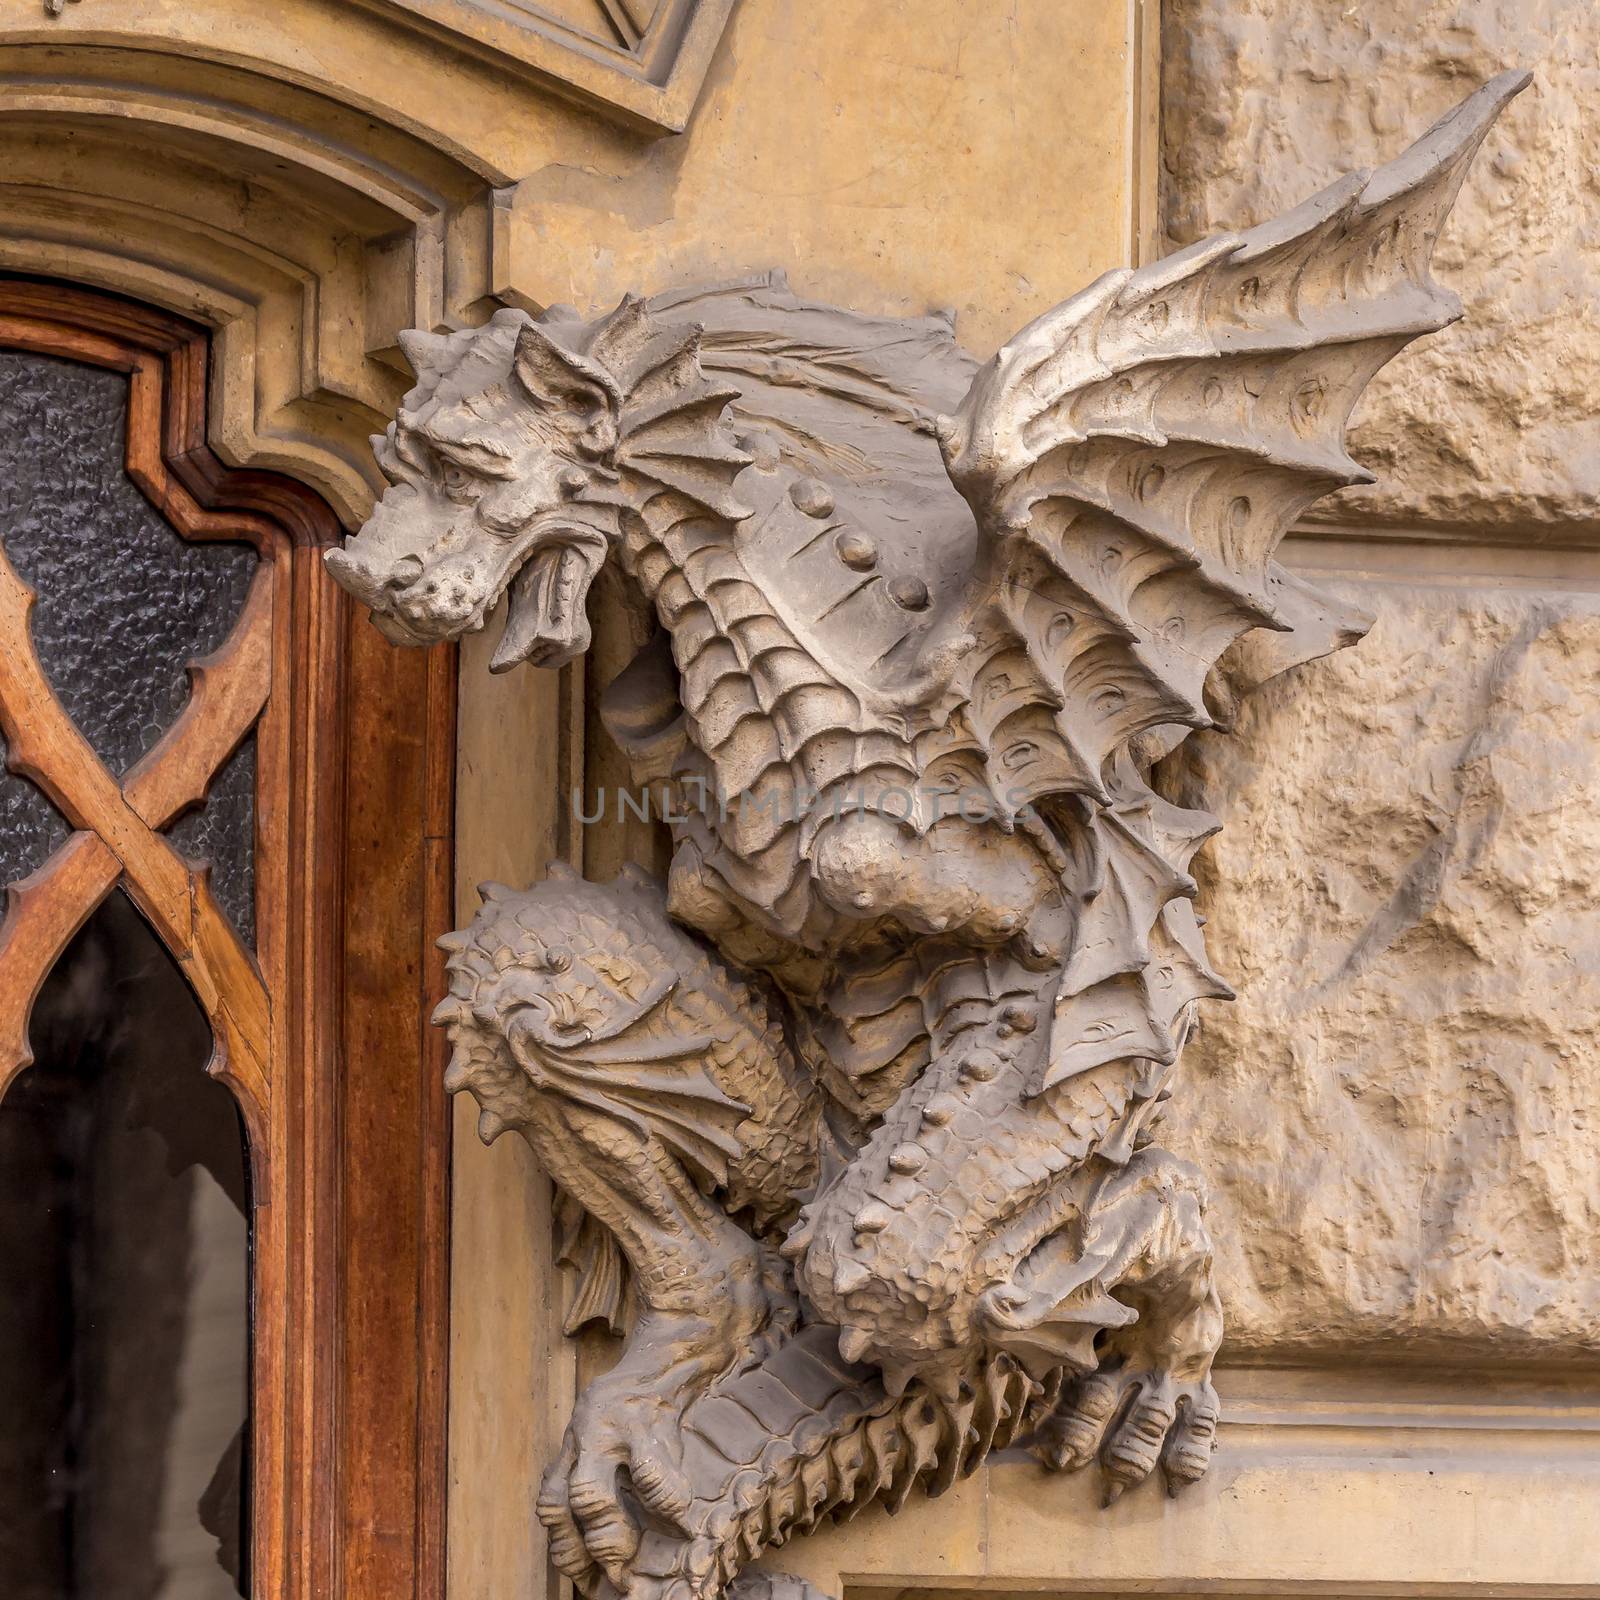 TURIN, ITALY - Dragon on Victory Palace facade  by Perseomedusa